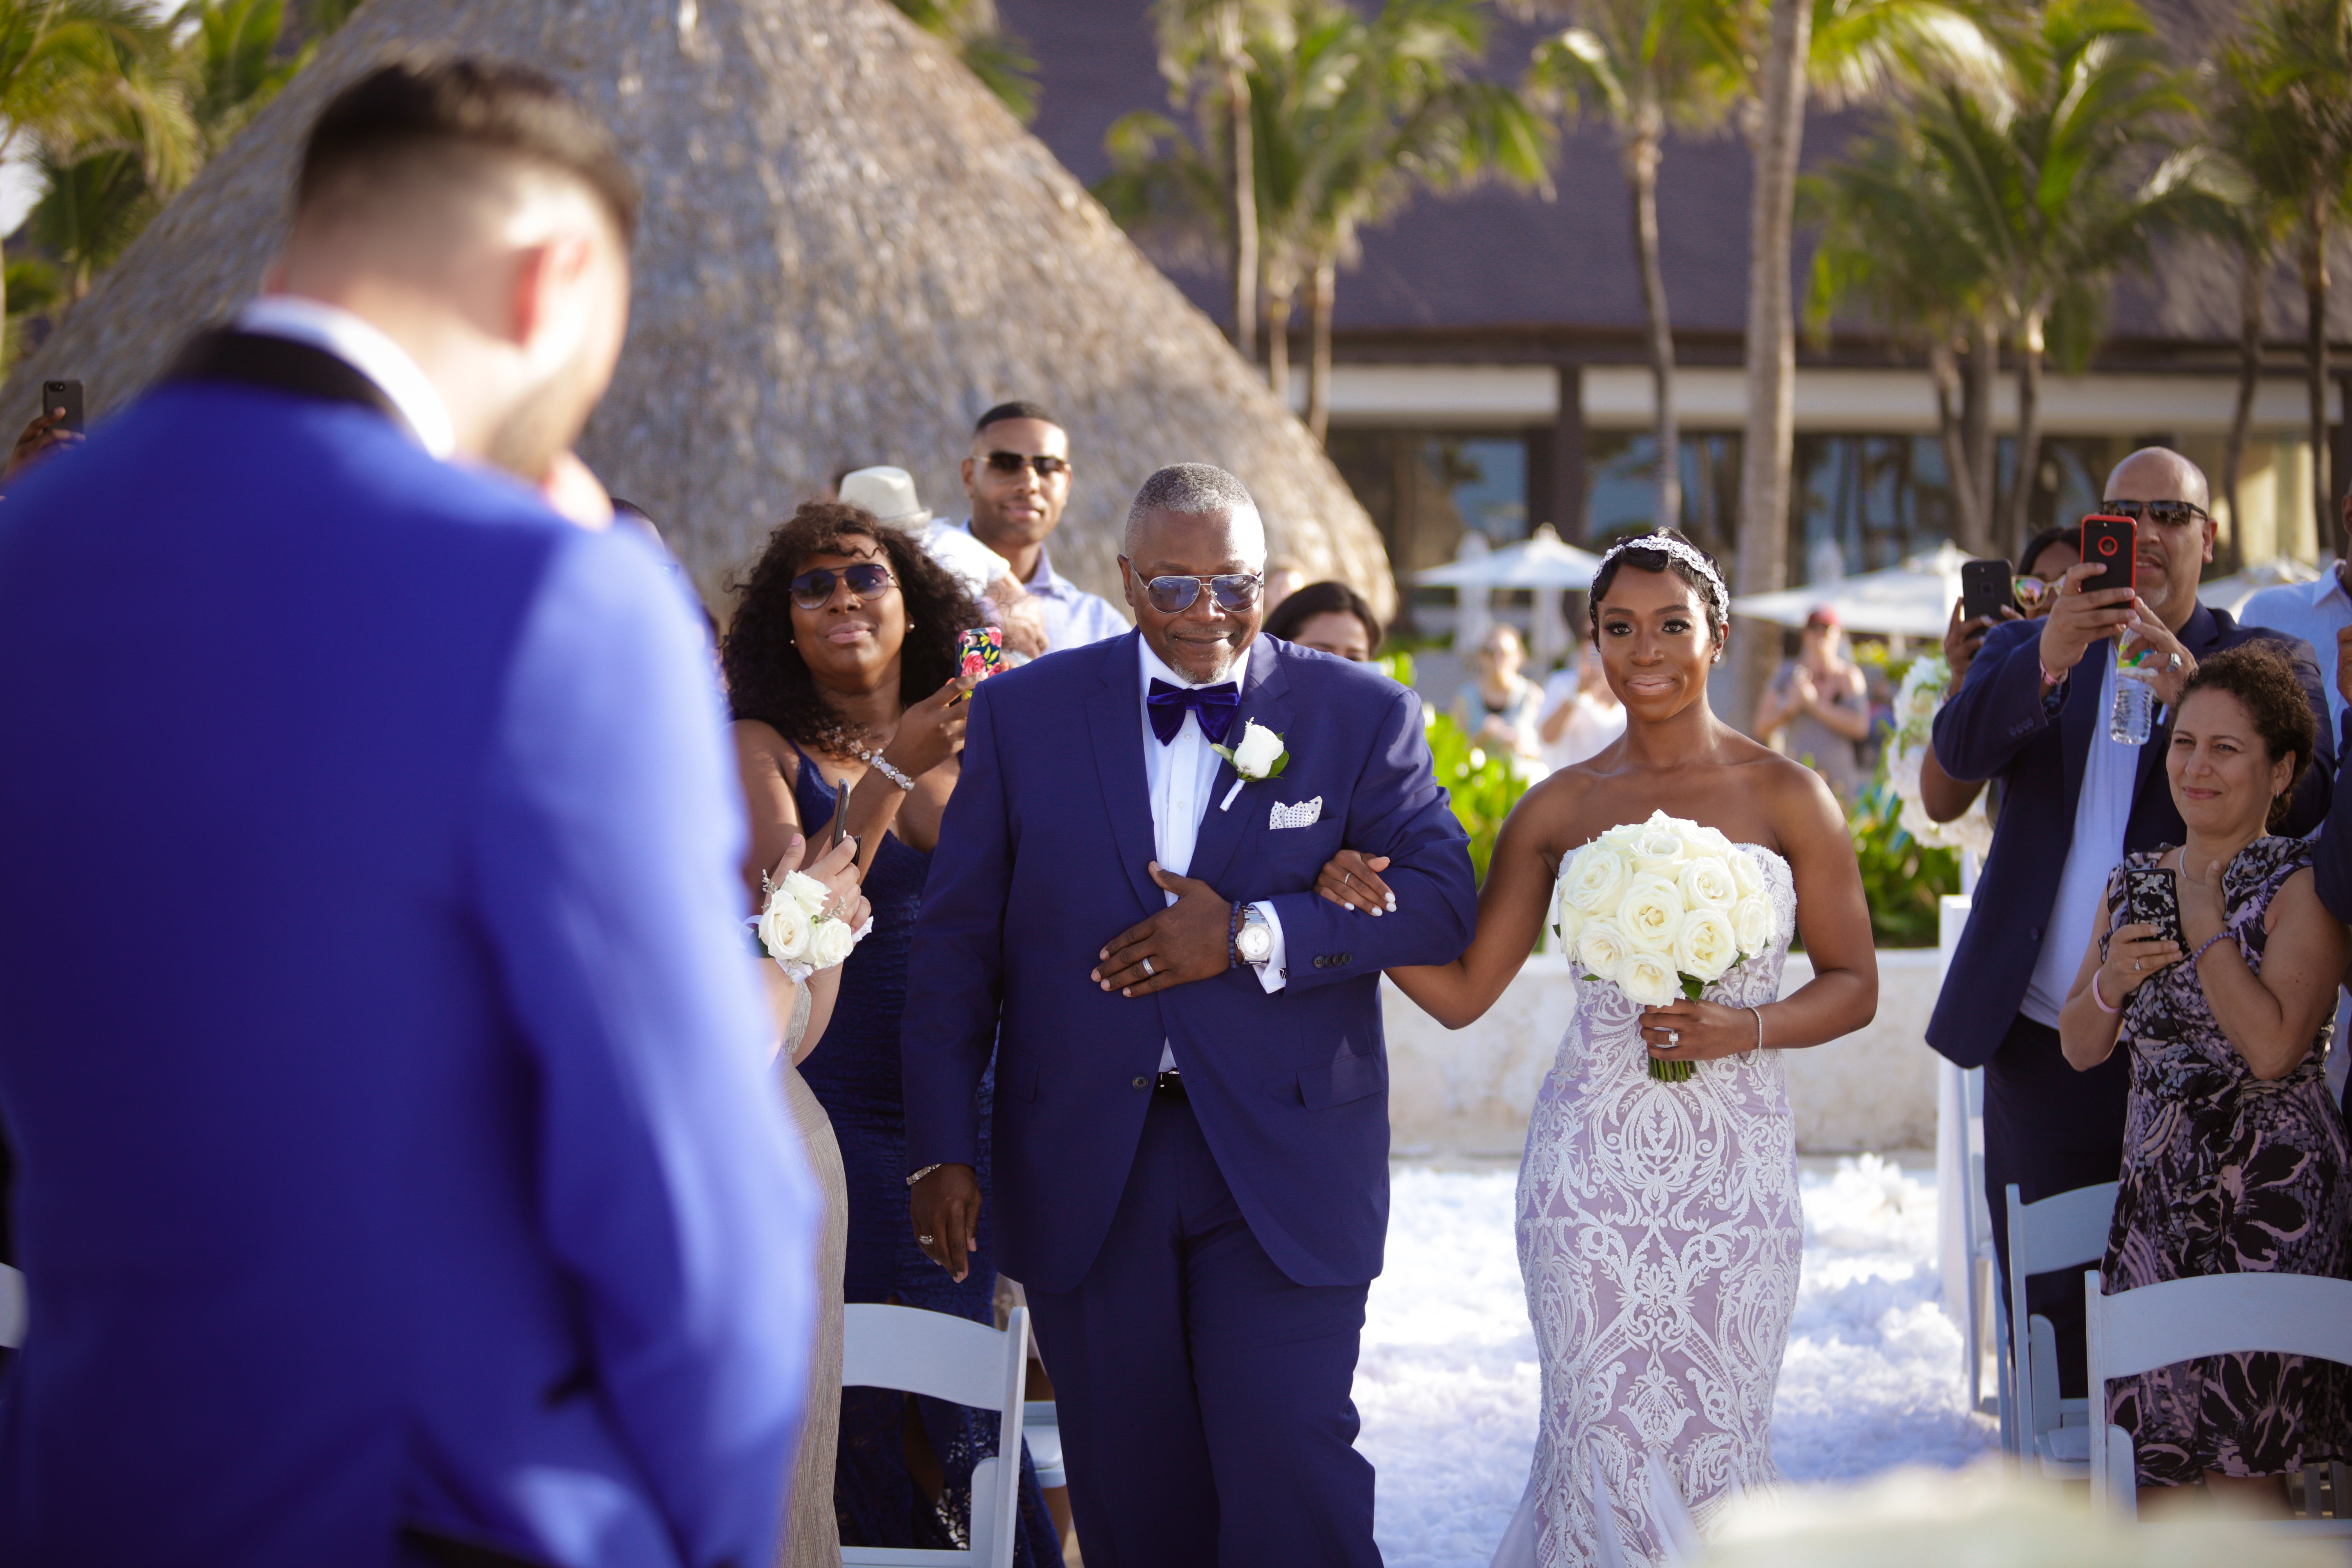 Bridal Bliss: Antonio And Alexis Brought Chic To The Beach For Their Gorgeous Wedding Day
